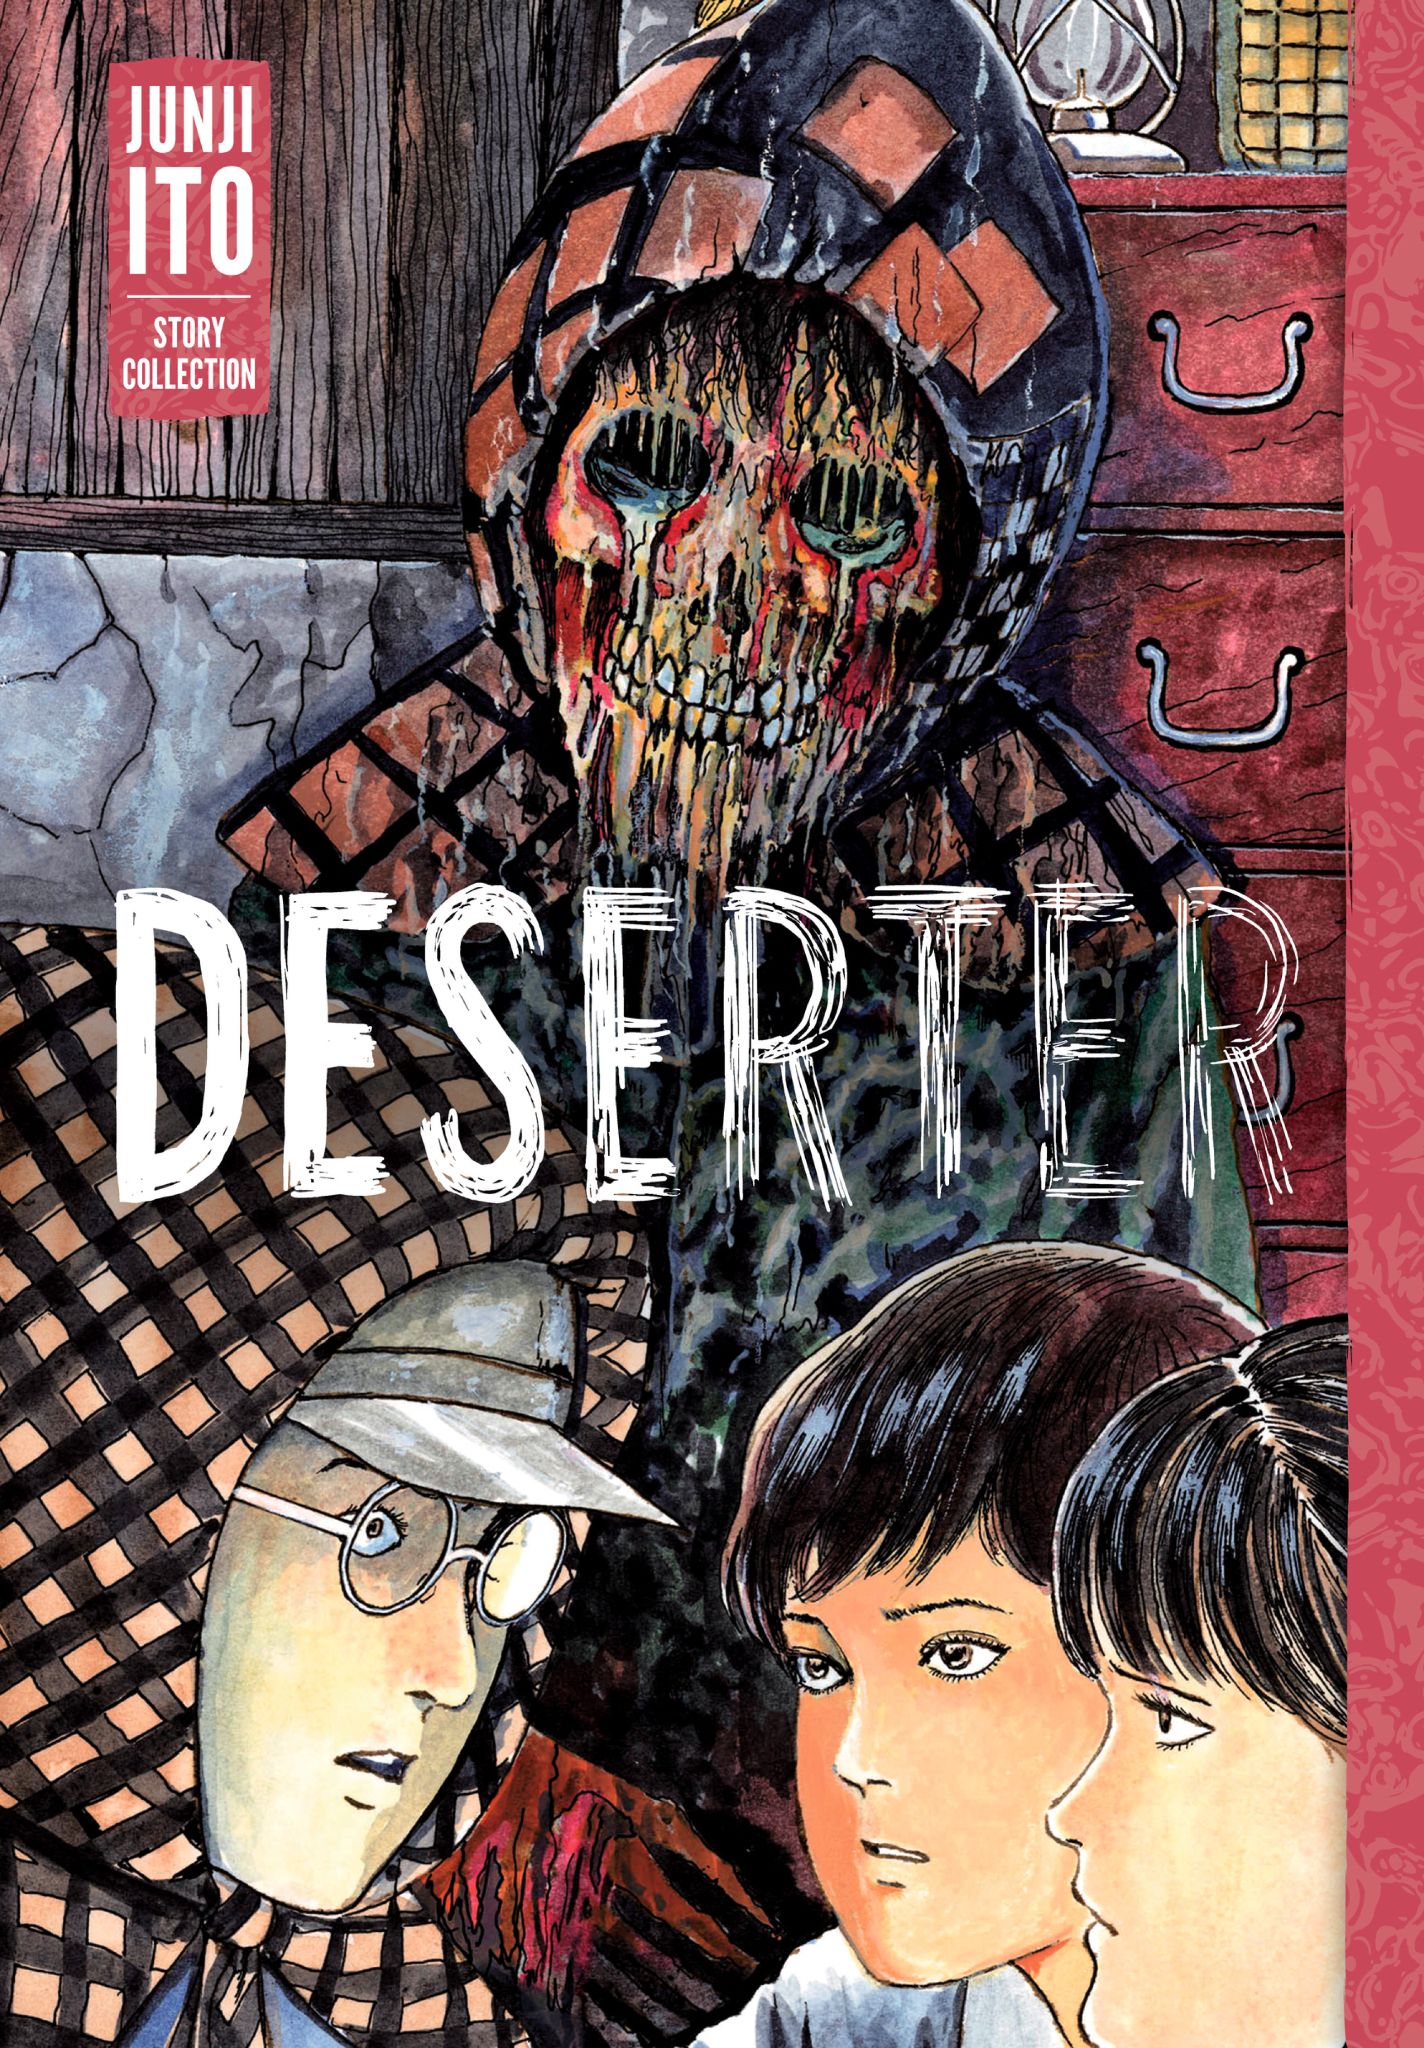 REVIEW: Deserter: Junji Ito Story Collection | CBR